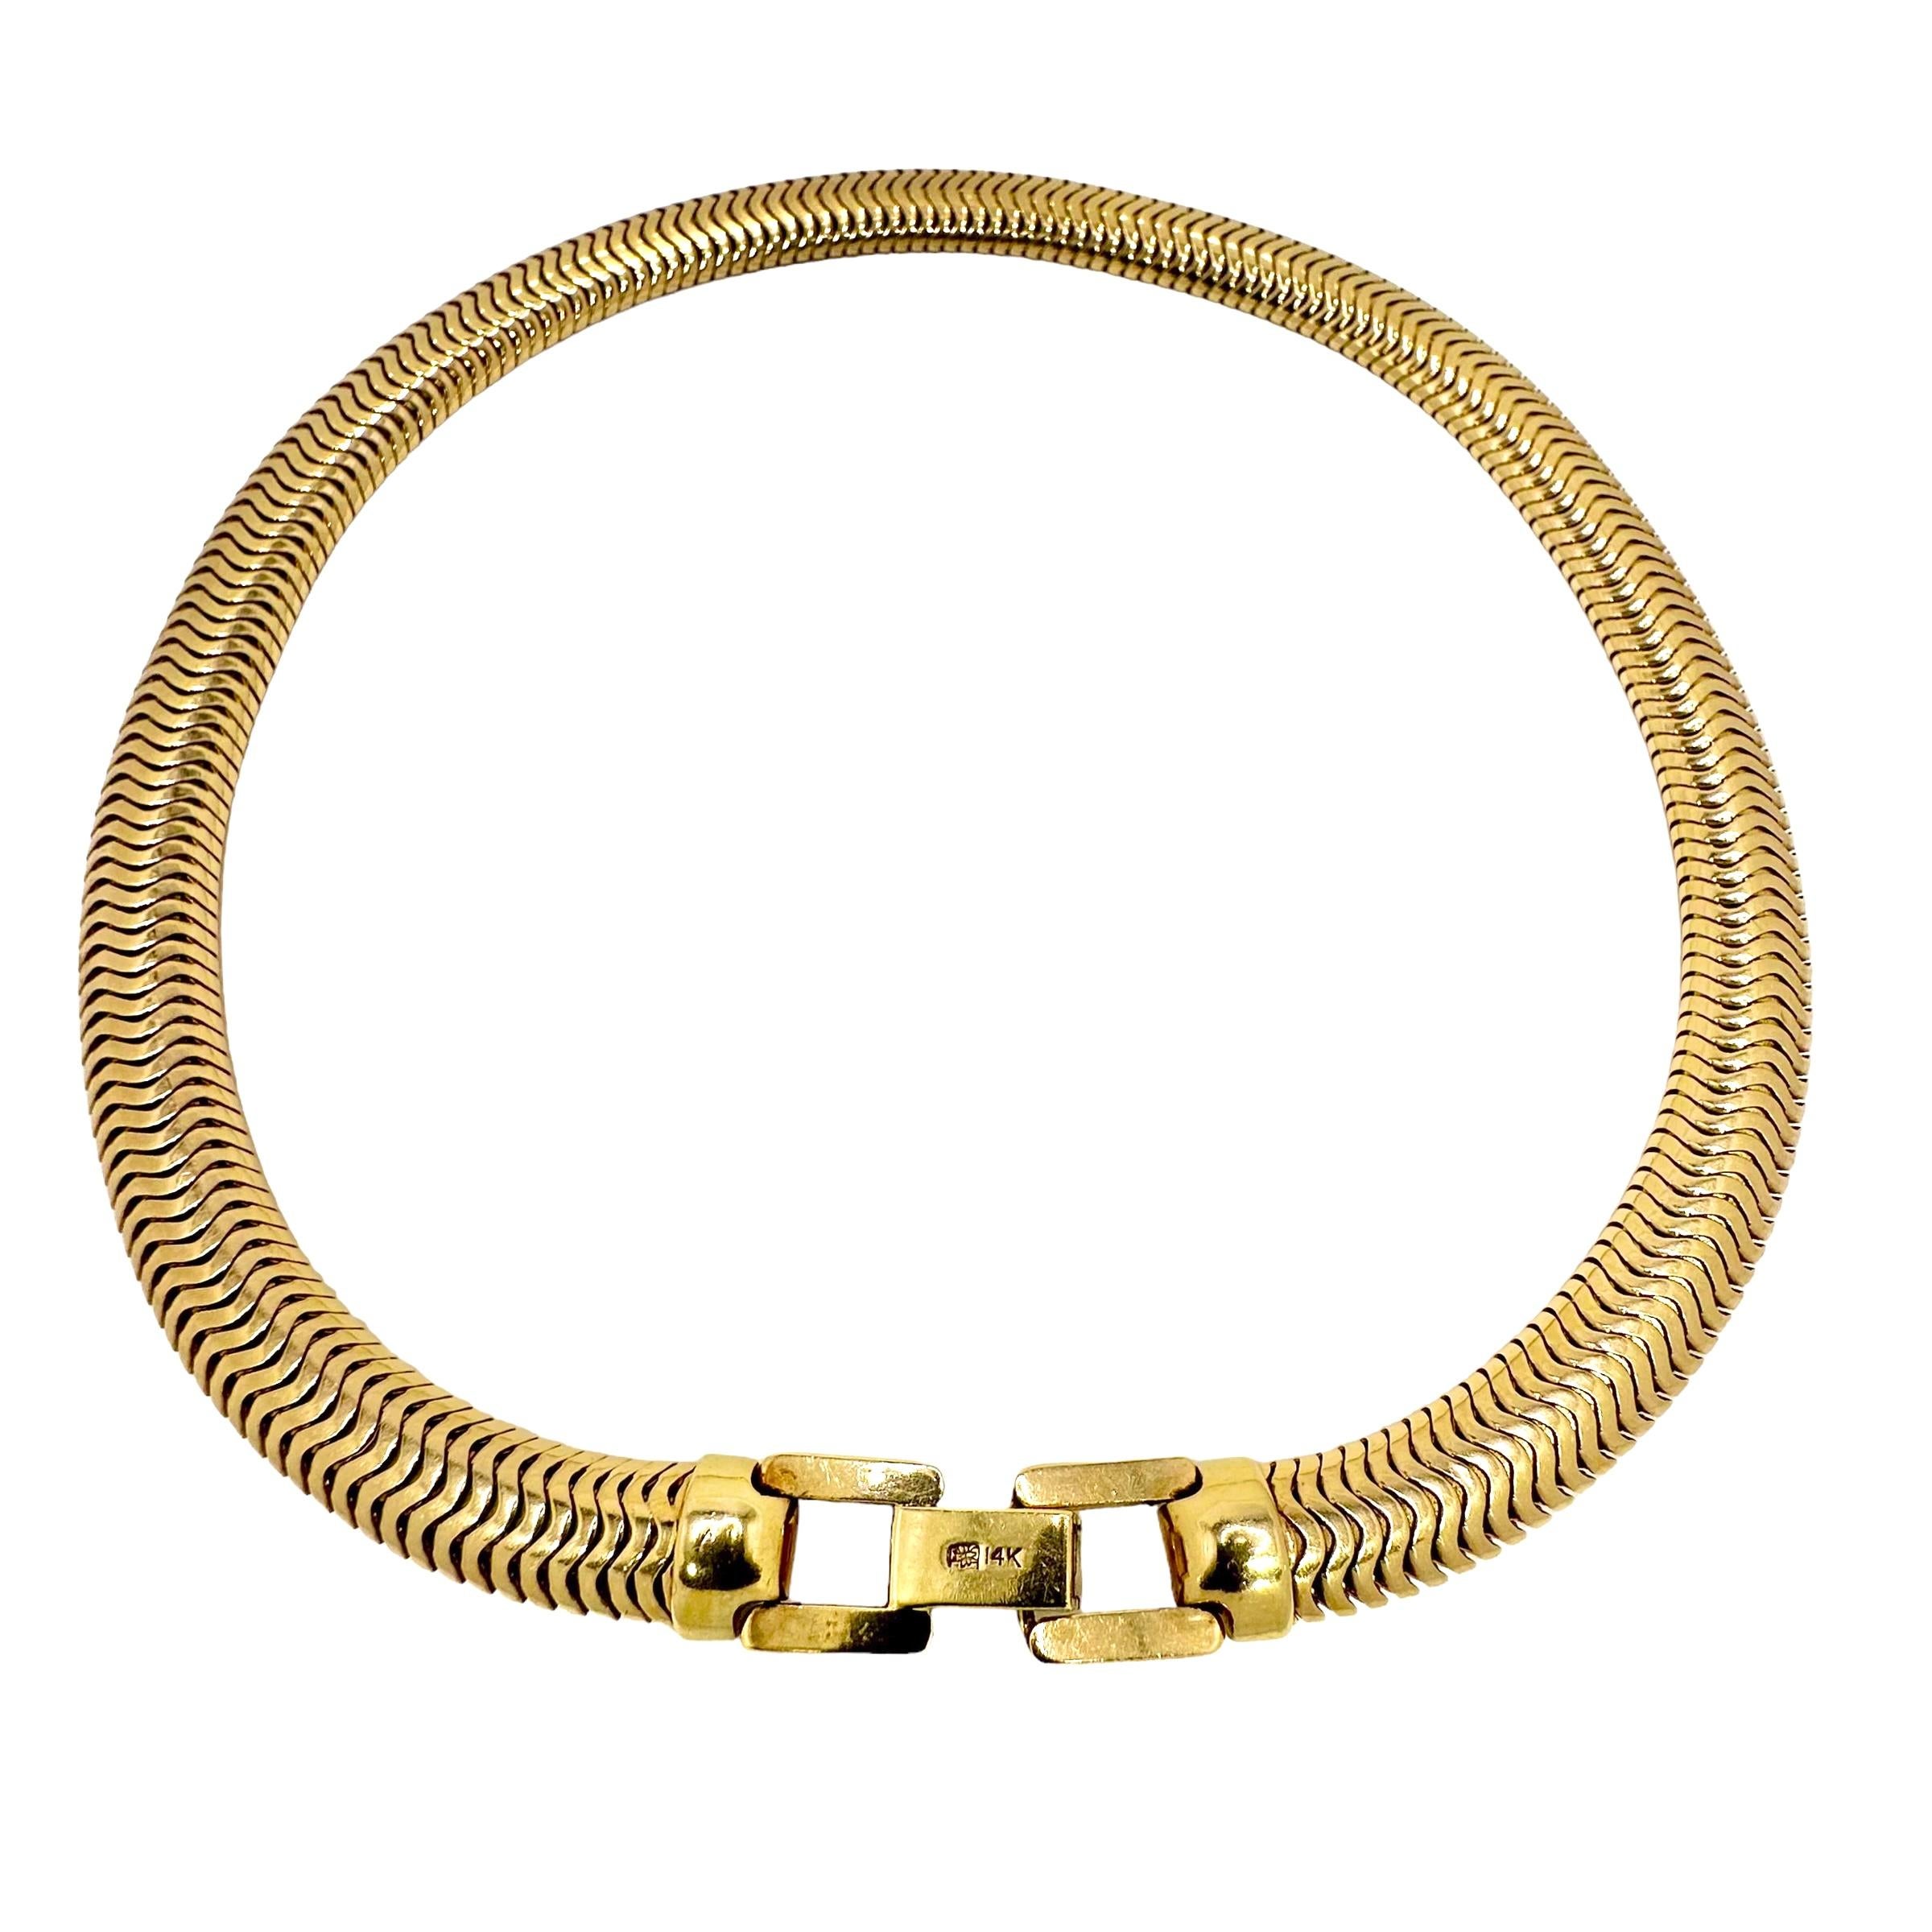 This particular American Cartier necklace is truly an expressive 